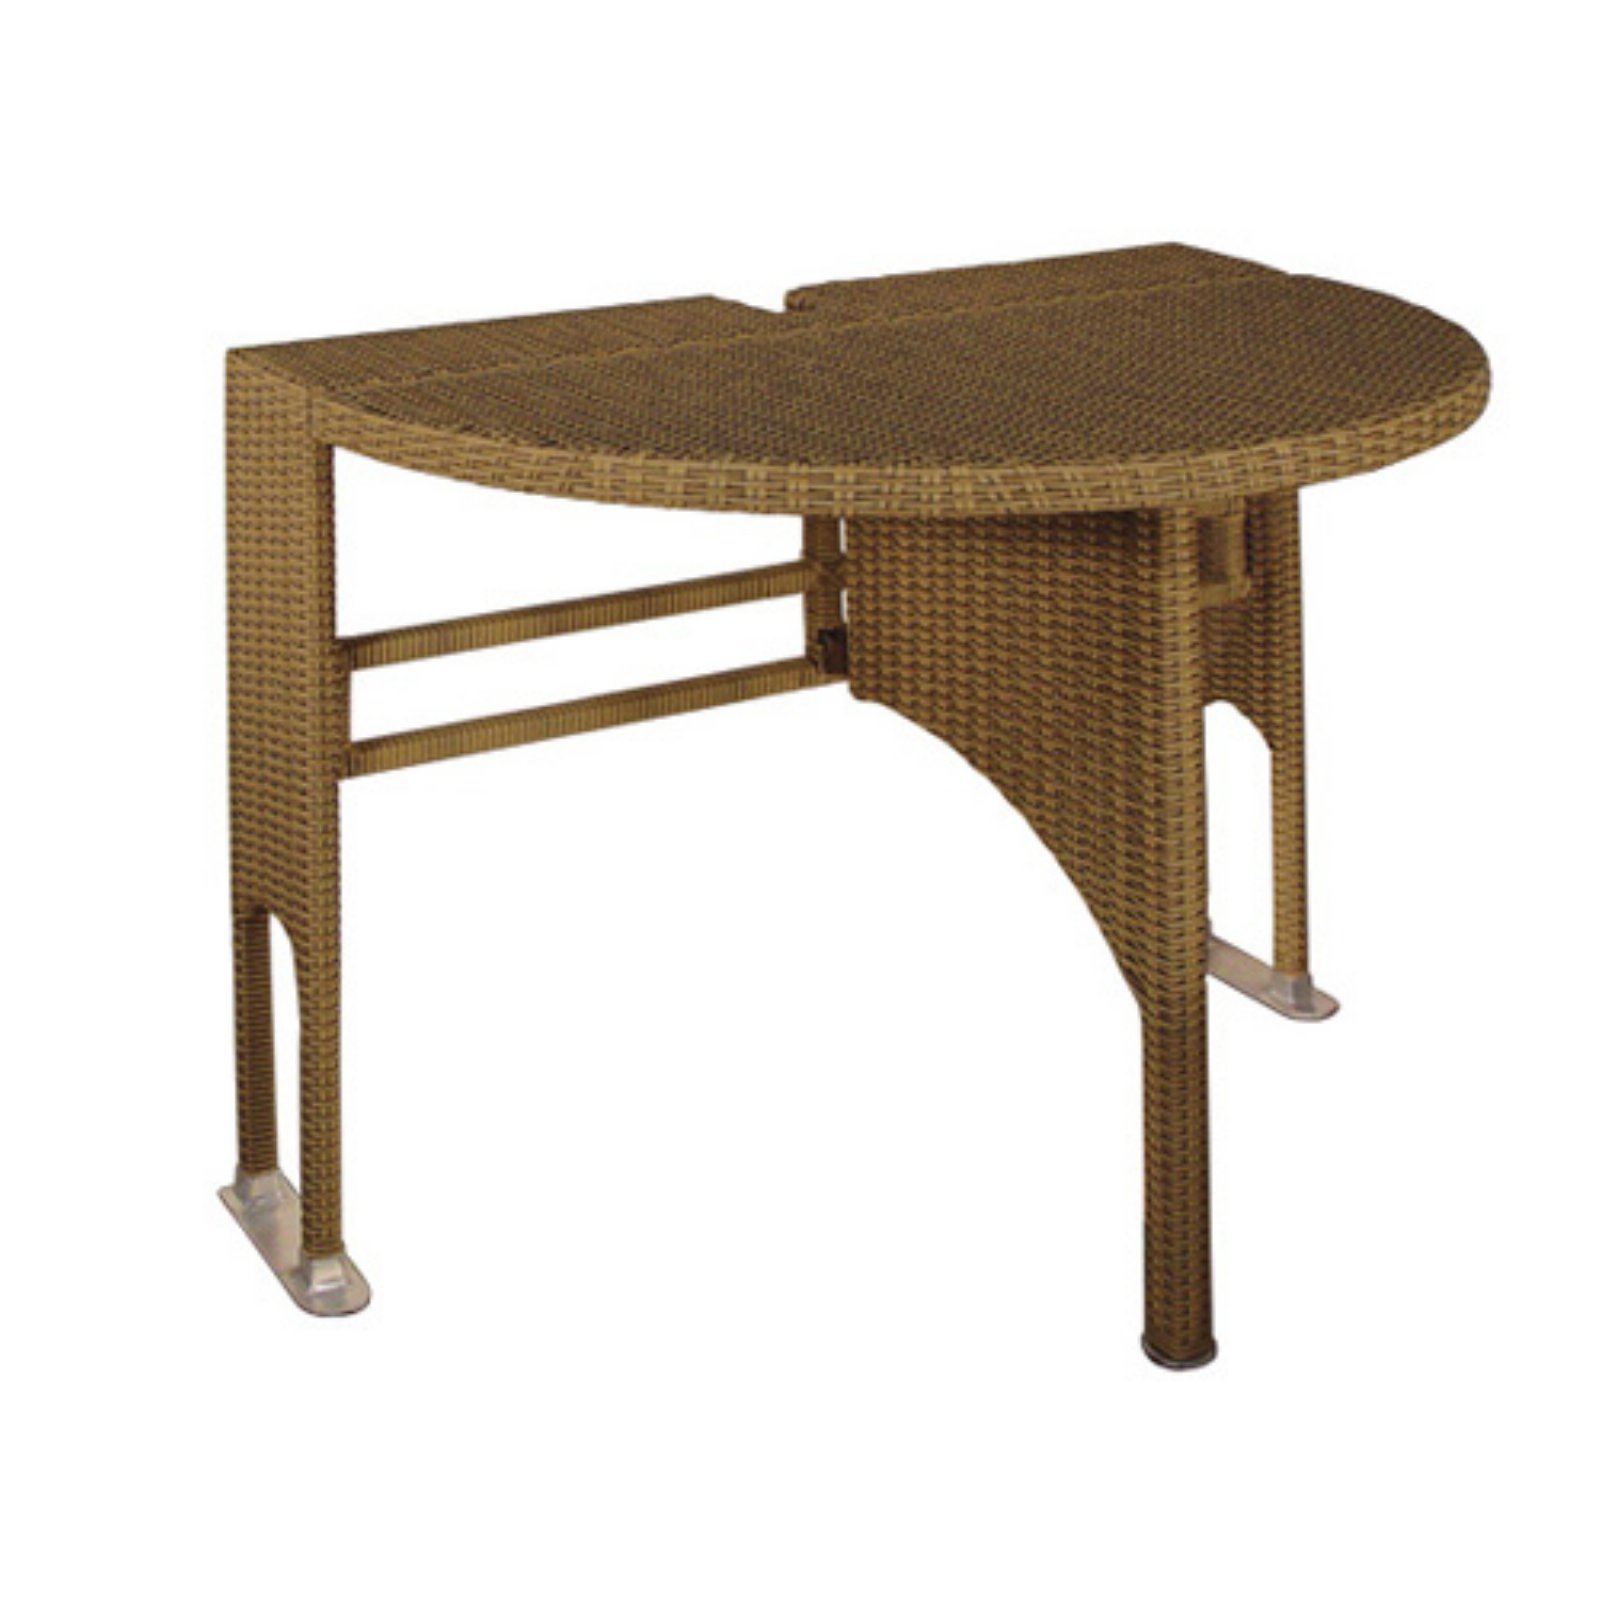 Blue Star Group Terrace Mates Adena All-Weather Wicker Coffee Color Table Set w/ 7.5'-Wide OFF-THE-WALL BRELLA - Chocolate Olefin Canopy - image 3 of 9